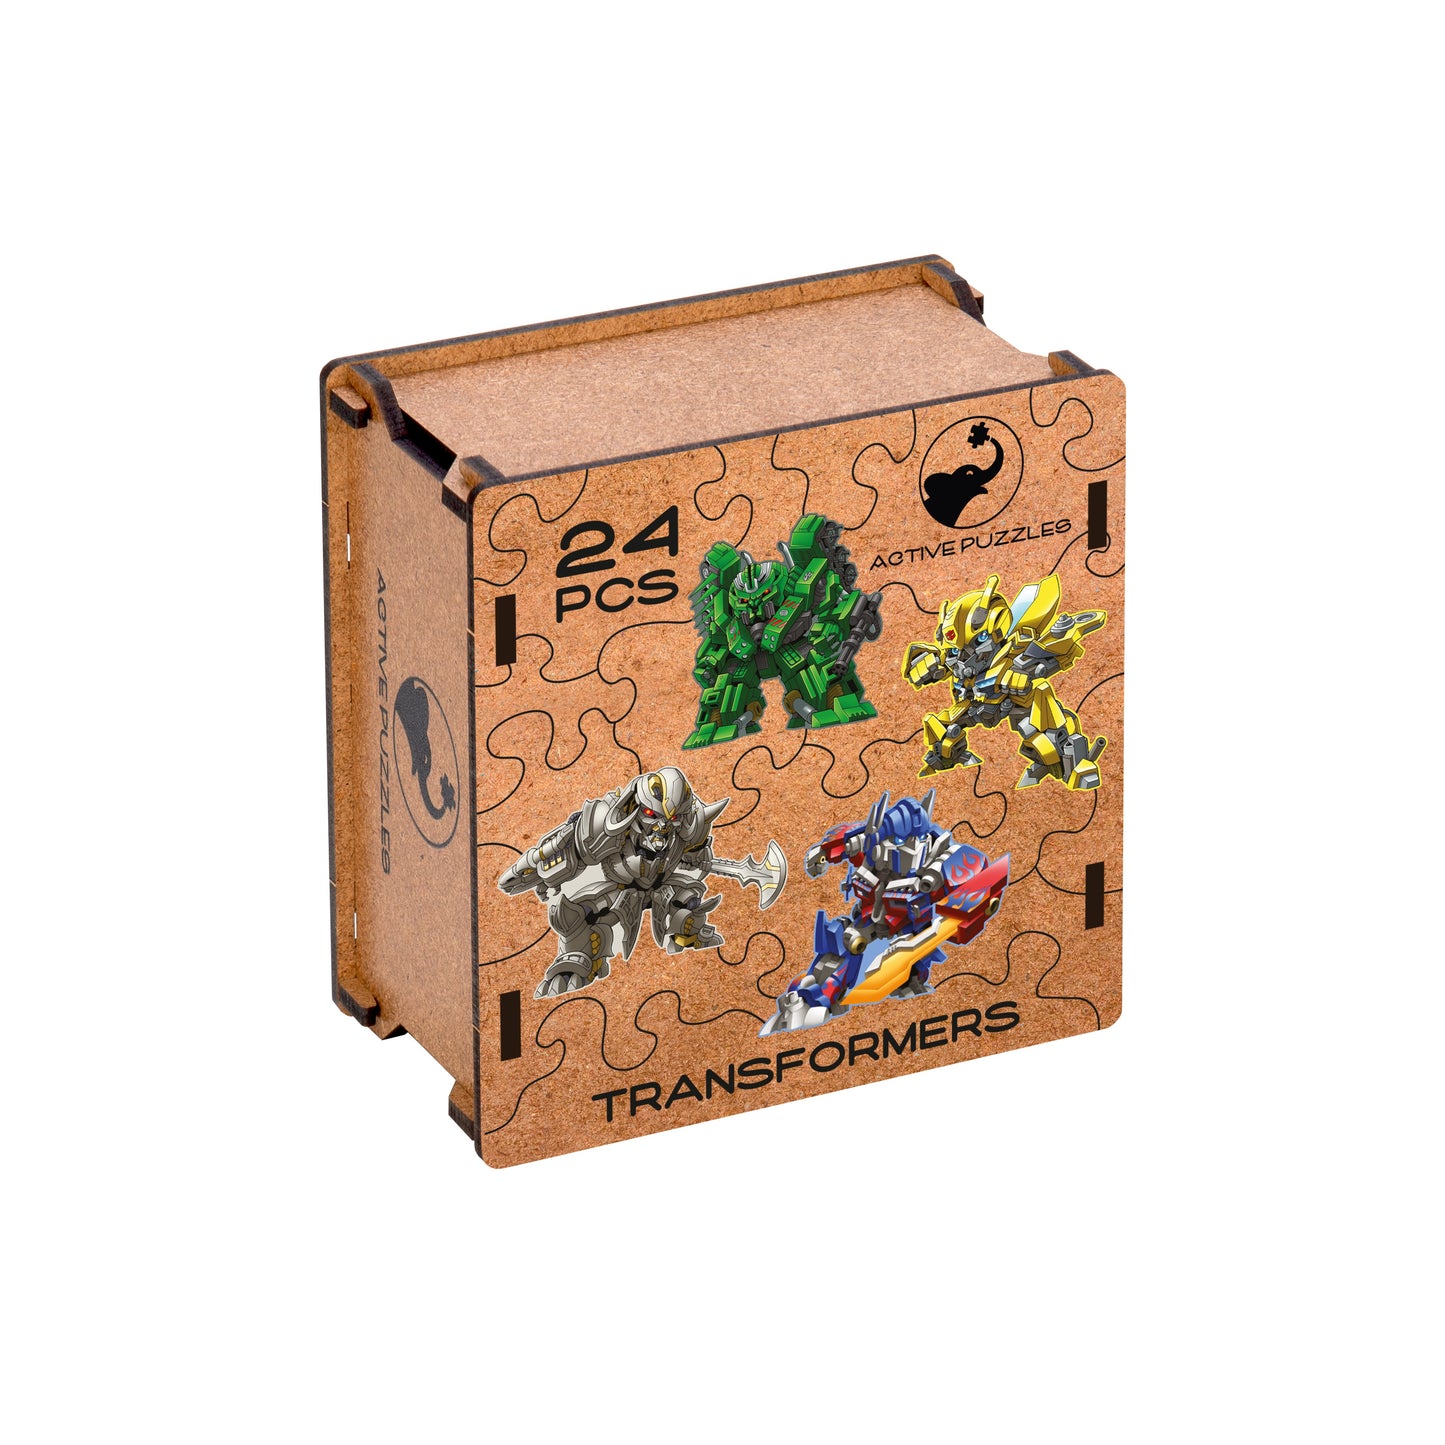 Transformers 4 in 1 Wooden Puzzle Active Puzzles